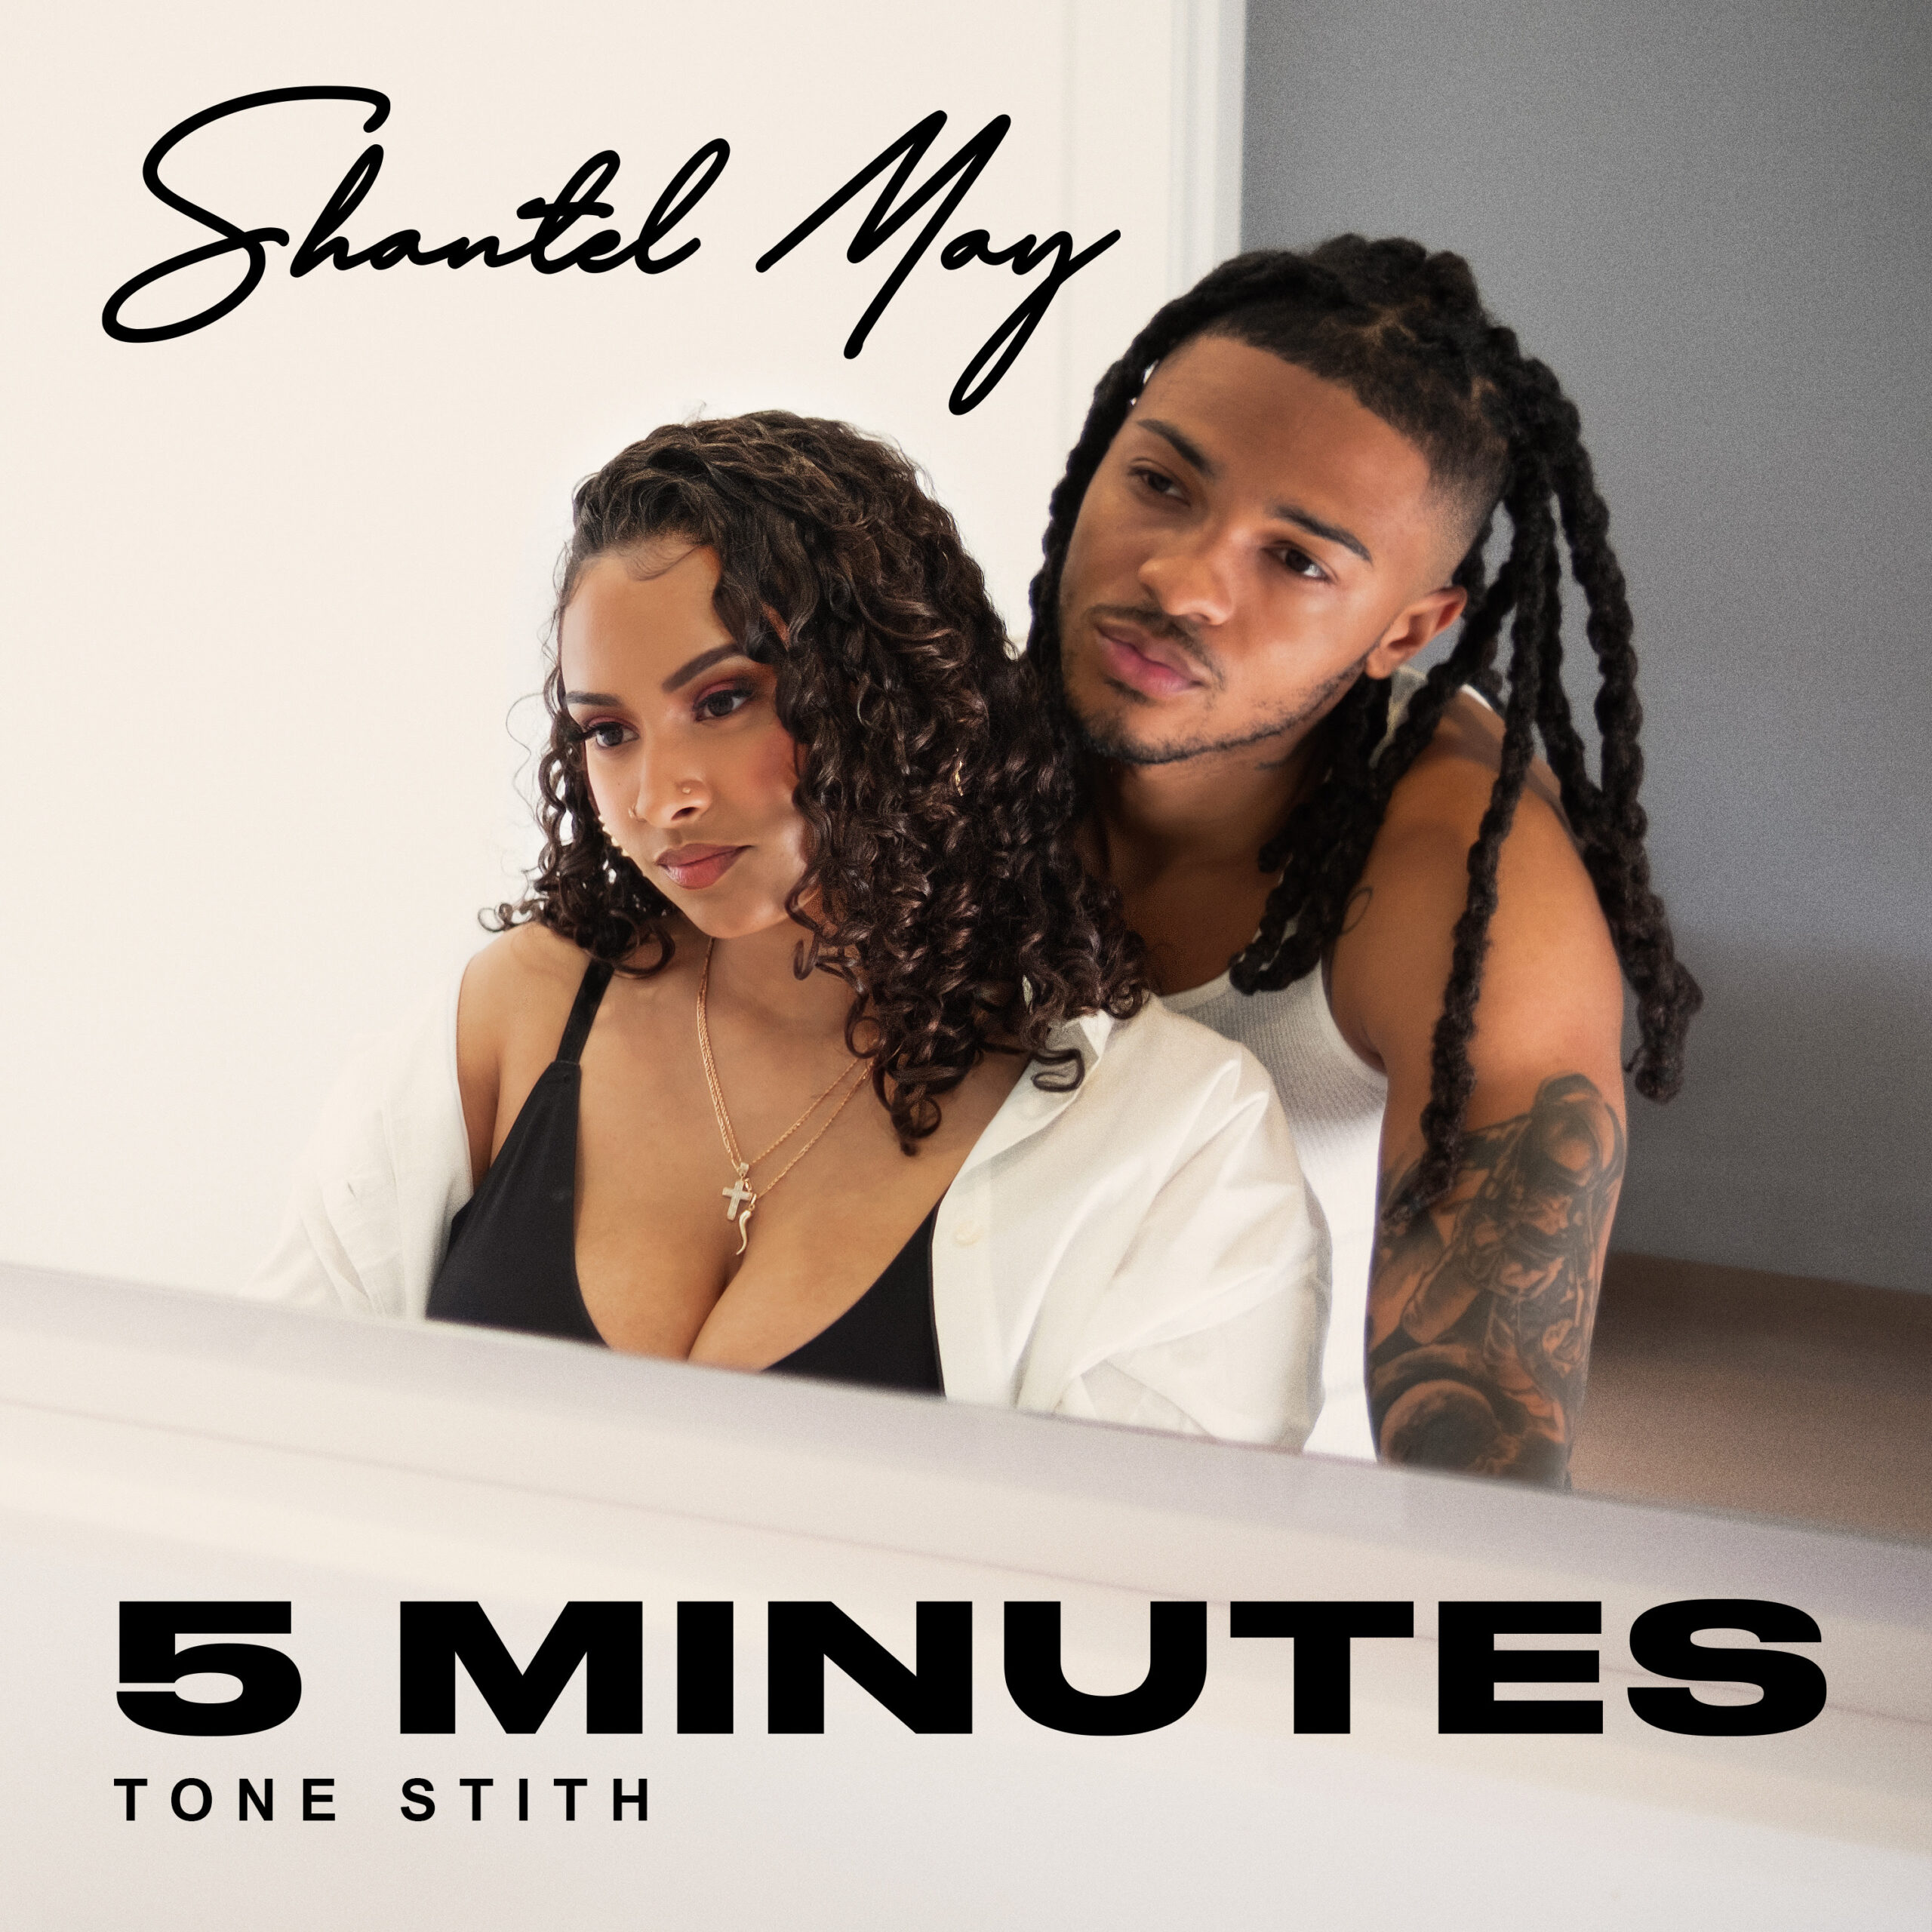 Shantel May Releases New Single “5 Minutes” Featuring Tone Stith